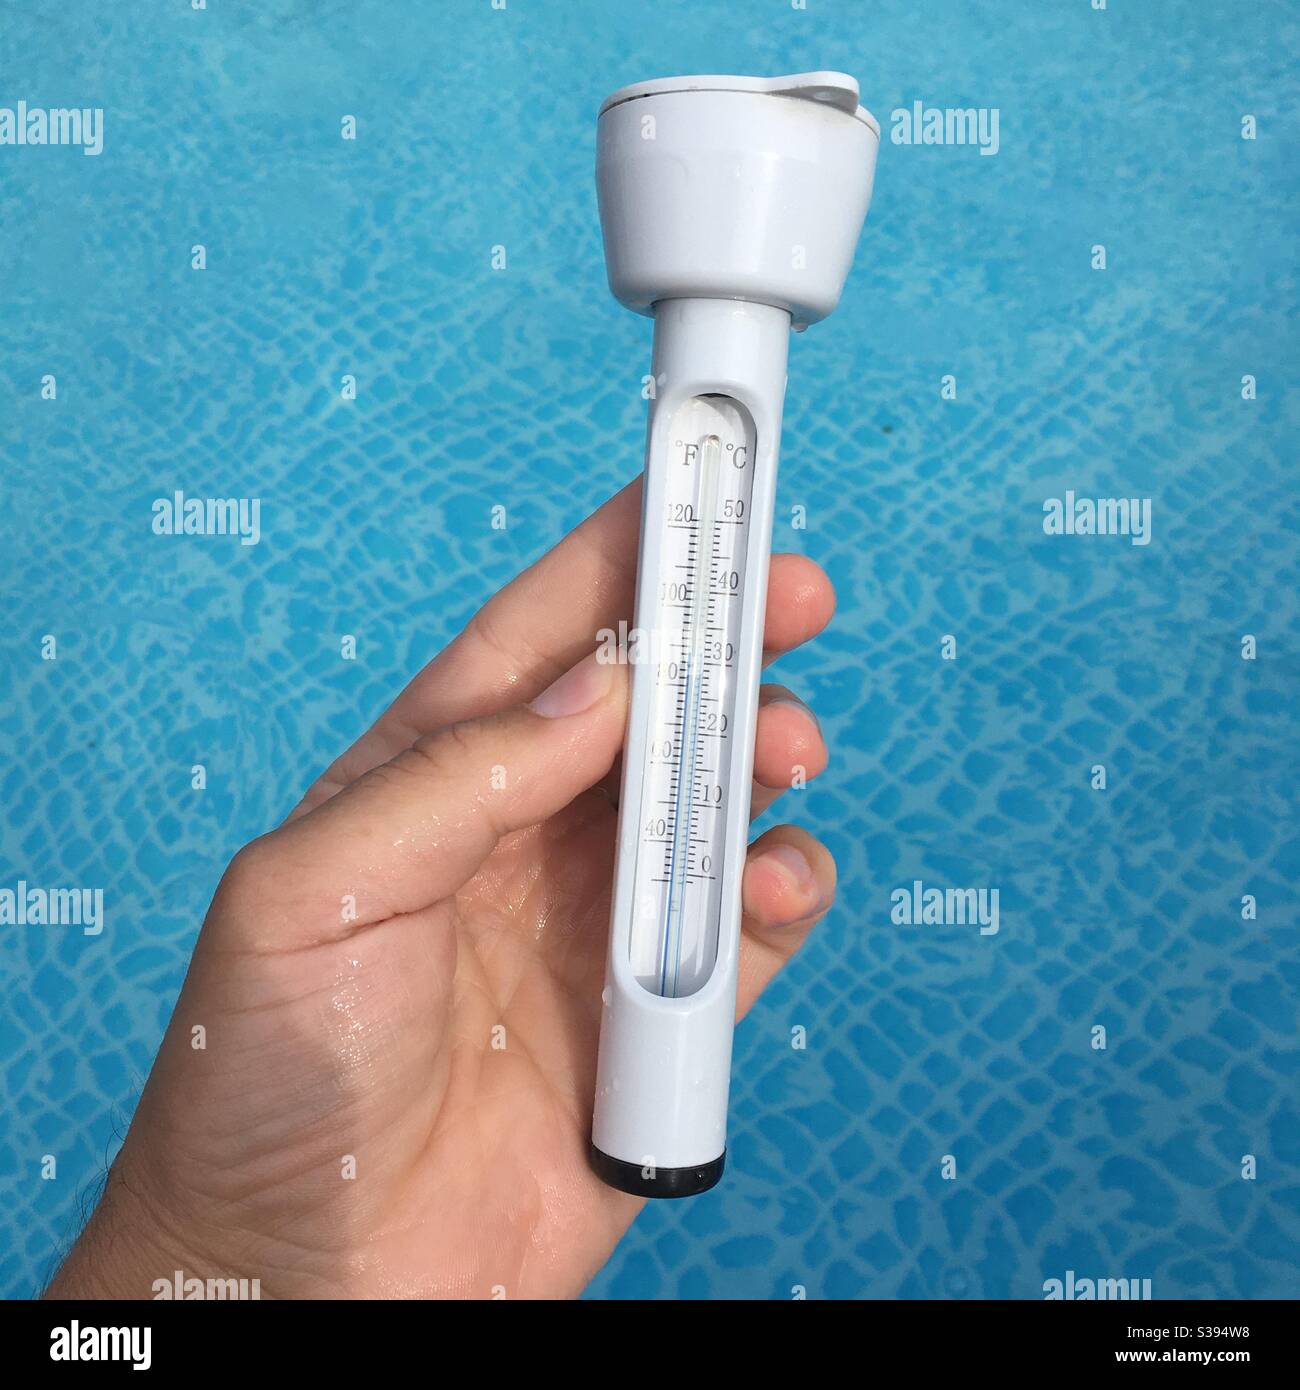 Pool thermometer reading 31 degrees Stock Photo